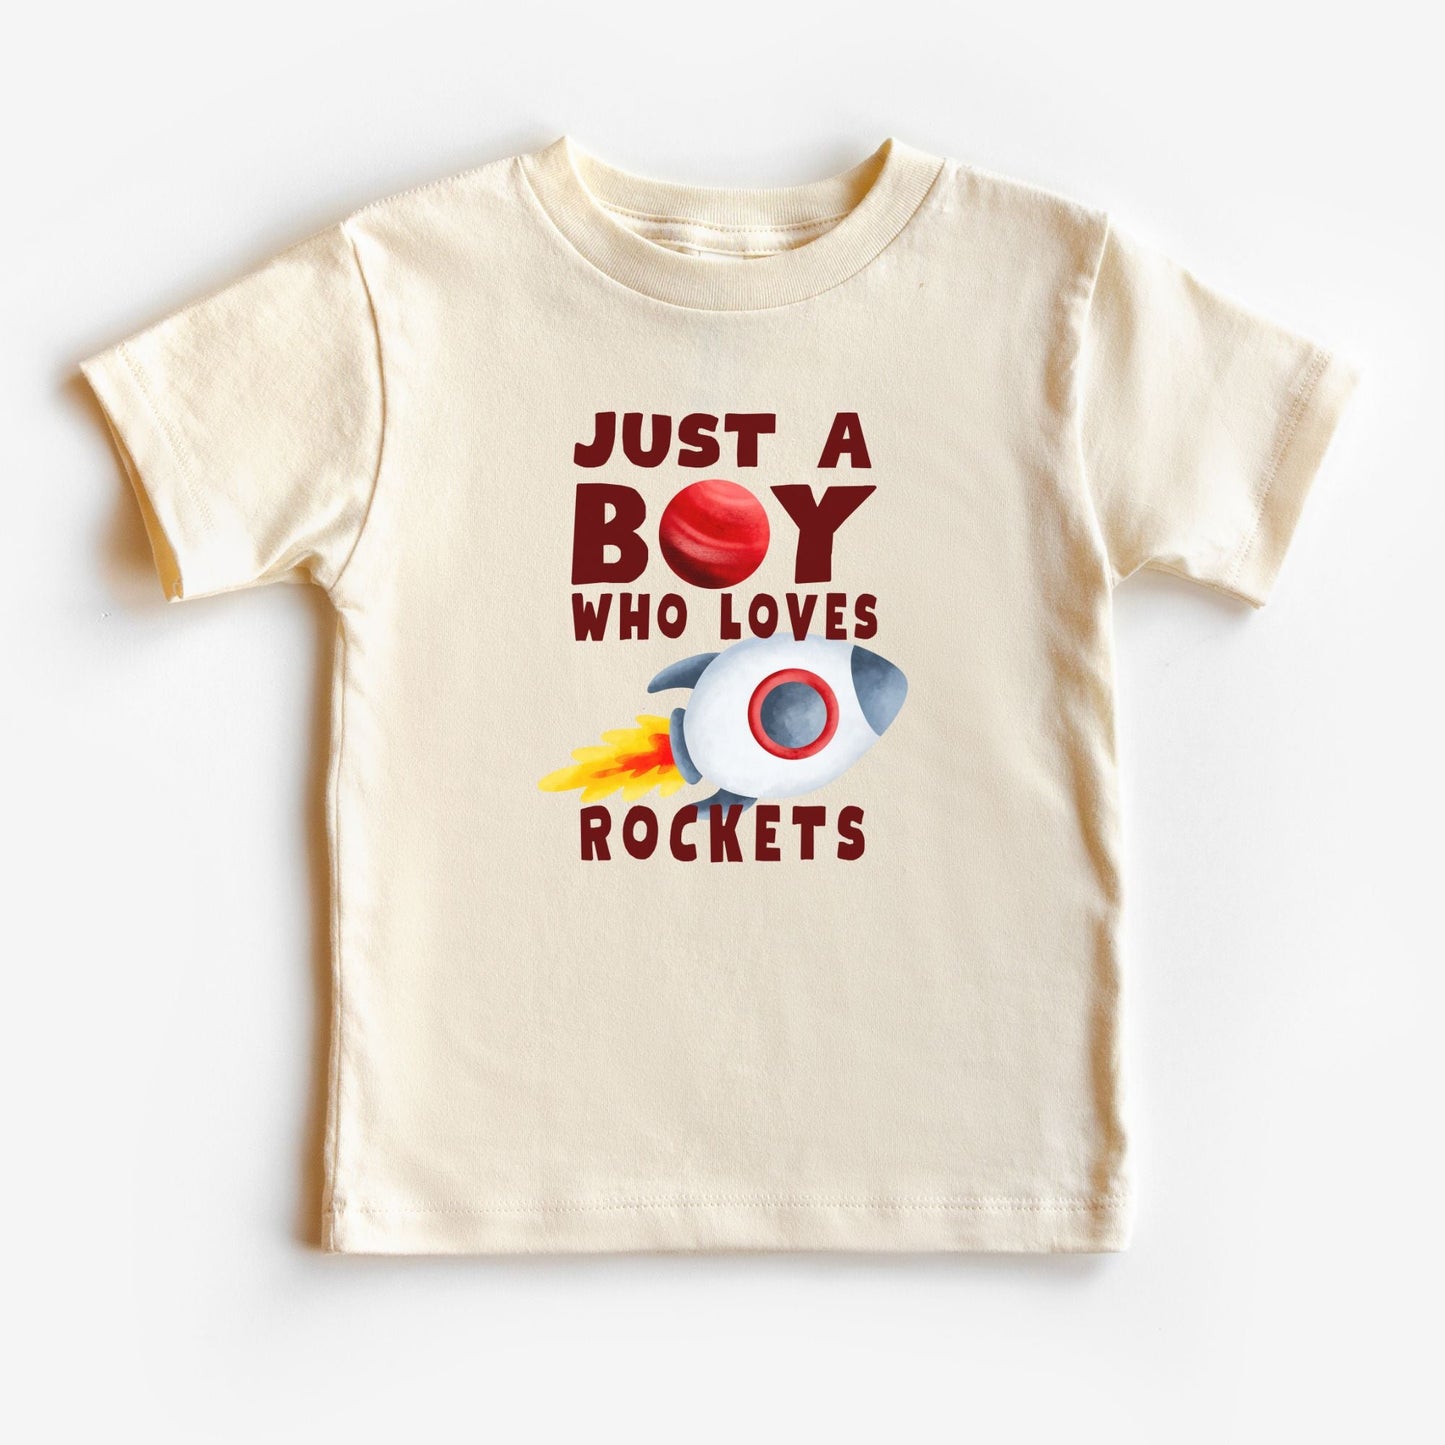 Just A Boy Who Loves Rockets 🚀👨🏻‍🚀 Youth Graphic Tees